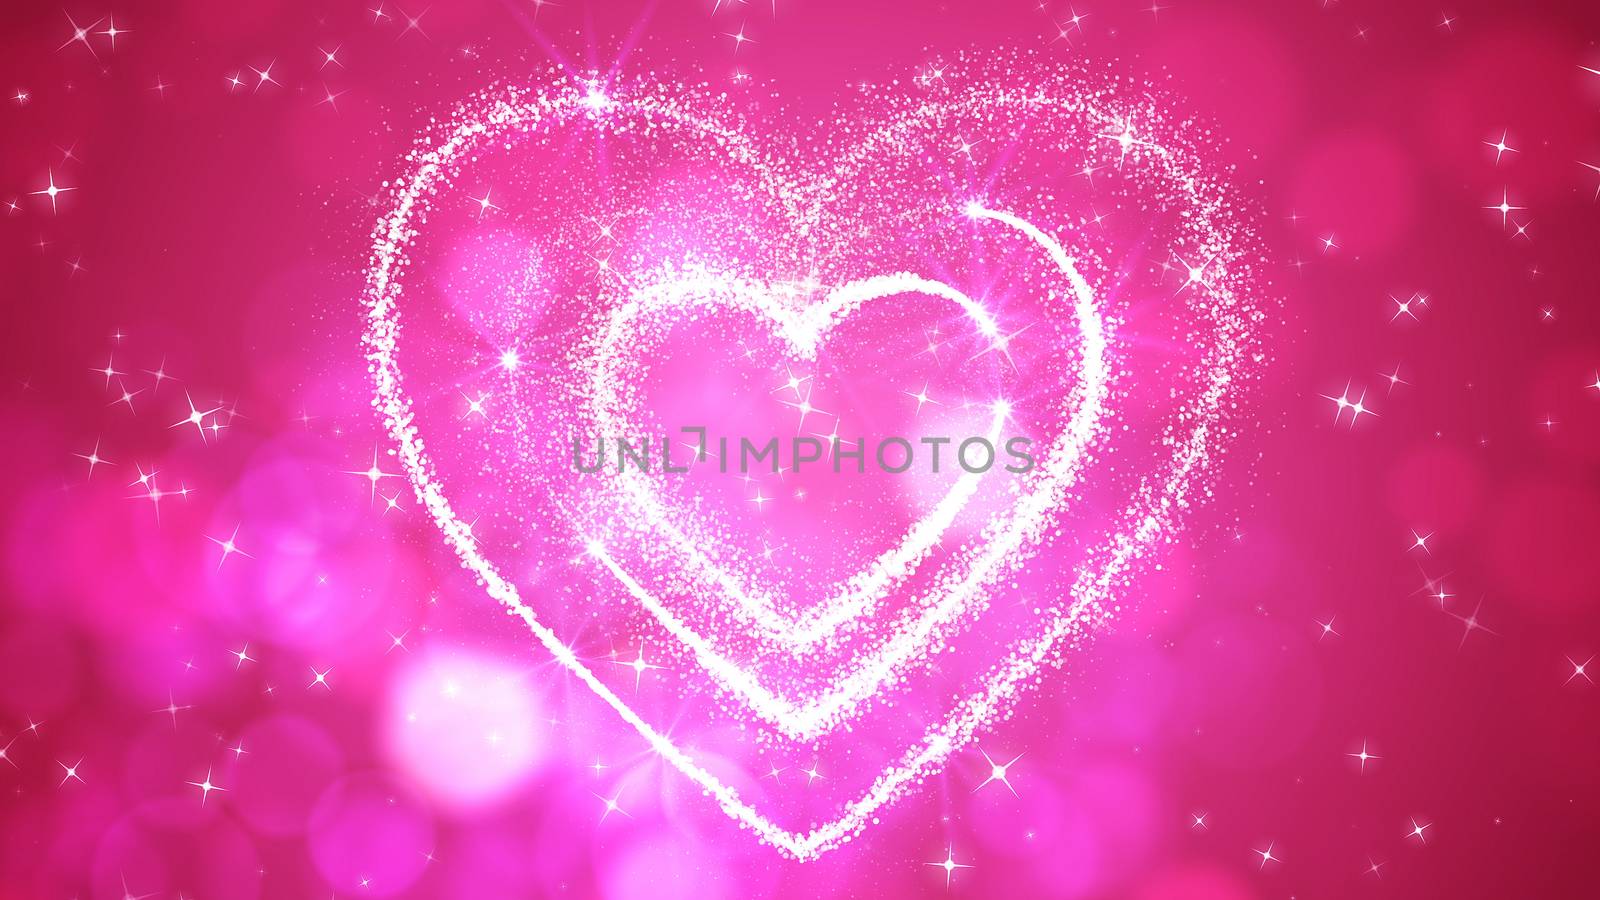 A congratulatory 3d rendering of three sparkling hearts put into each other. They look like a happy family symbol with a Father, Mother, and a child, with stars in the rosy background.